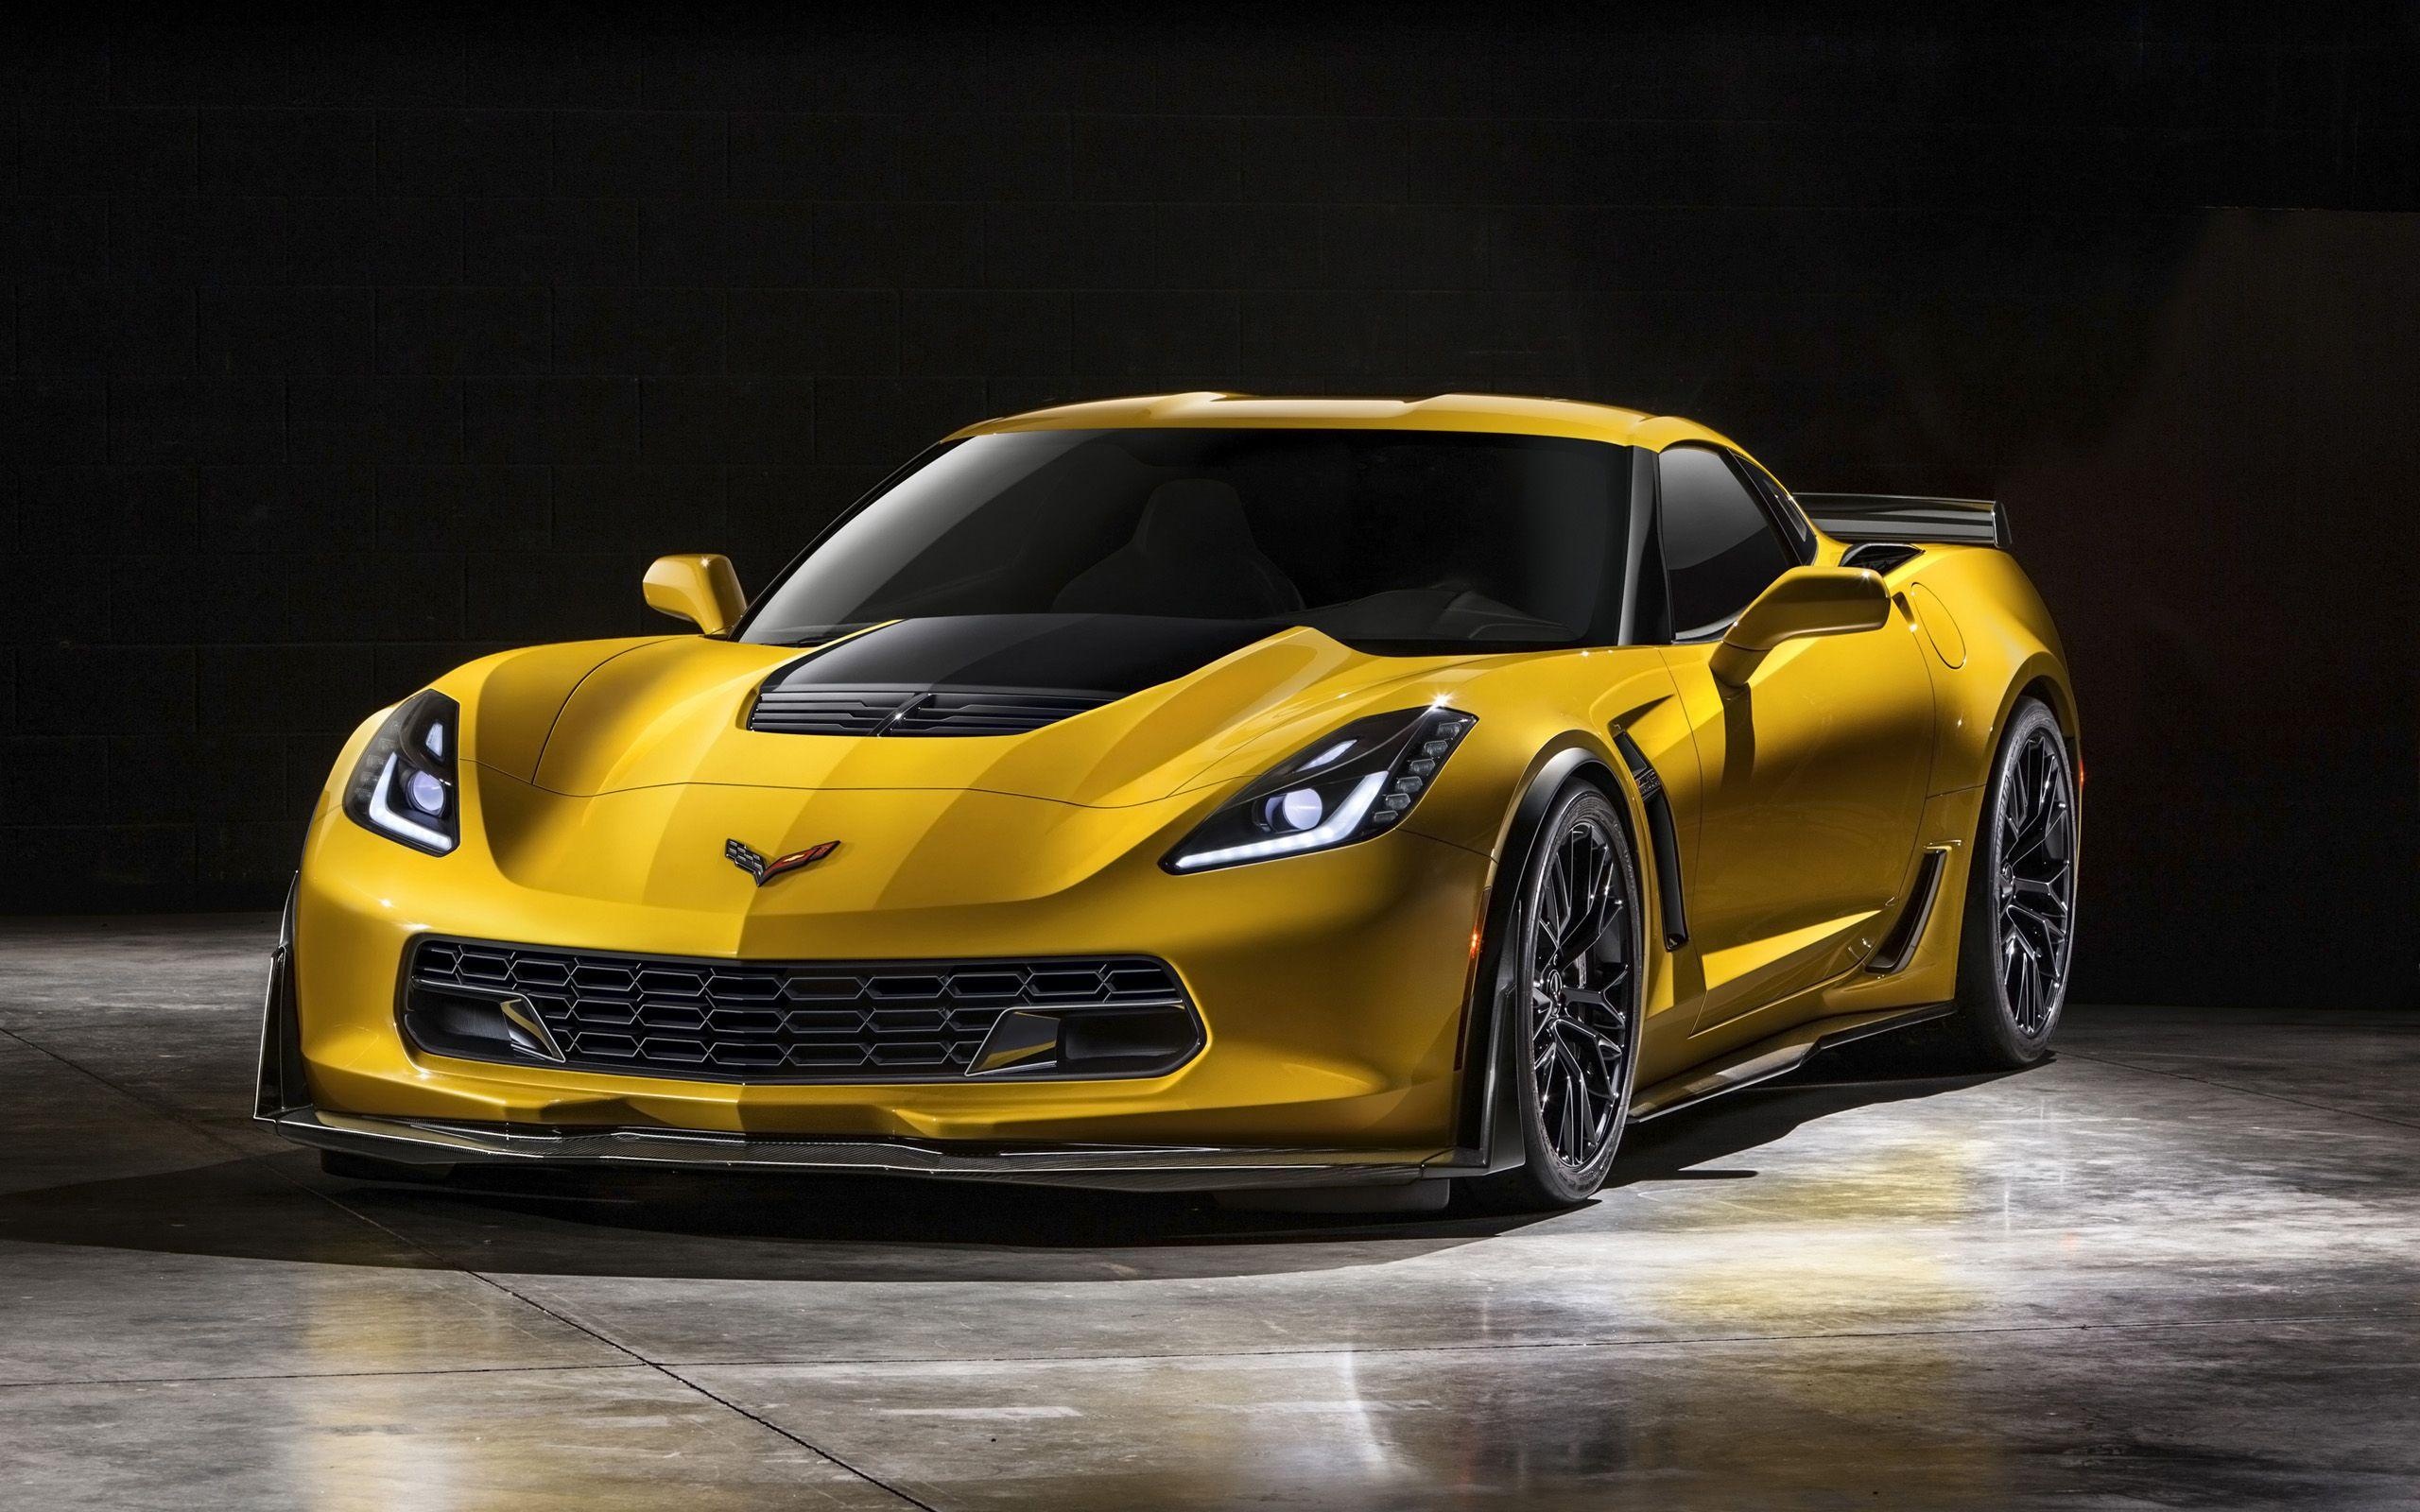 Corvette: Yellow Chevy Z06 C7, A high-performance supercharged version of a classic ZR1. 2560x1600 HD Wallpaper.